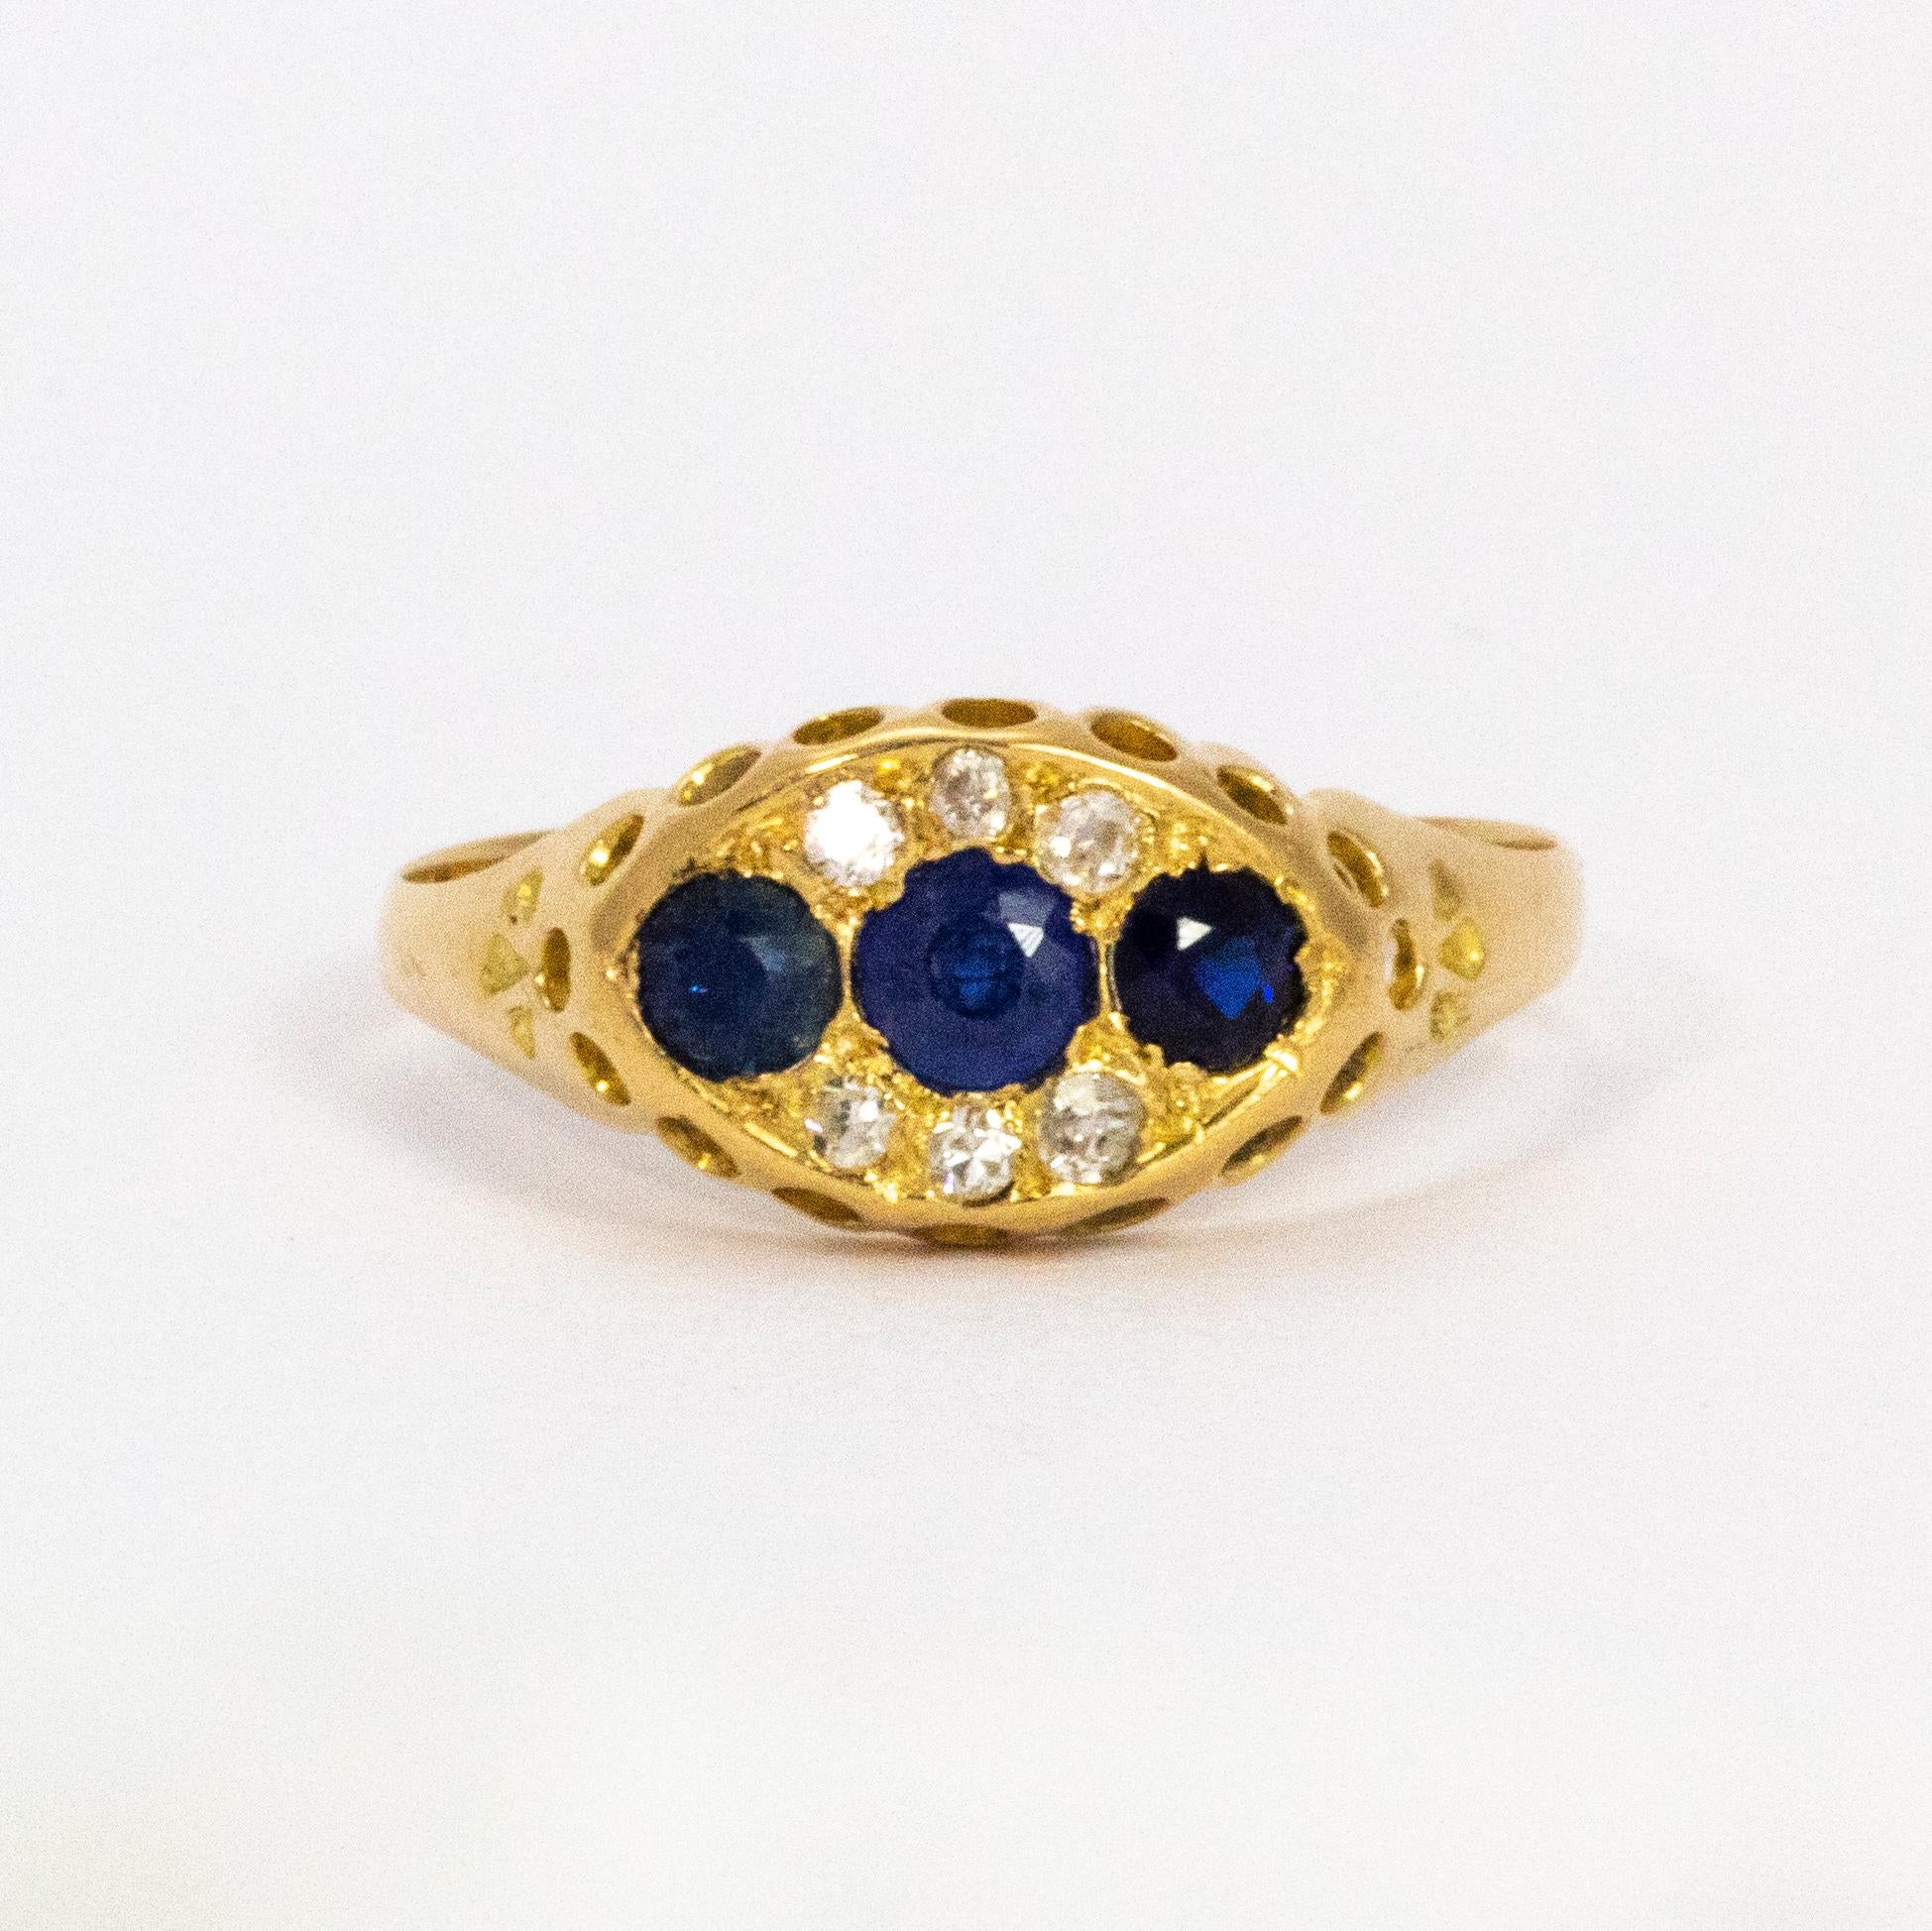 Three beautiful blue sapphires and six sparkling diamonds held by a very decorative 18ct gold ring.

Ring Size: N 1/2 or 7 